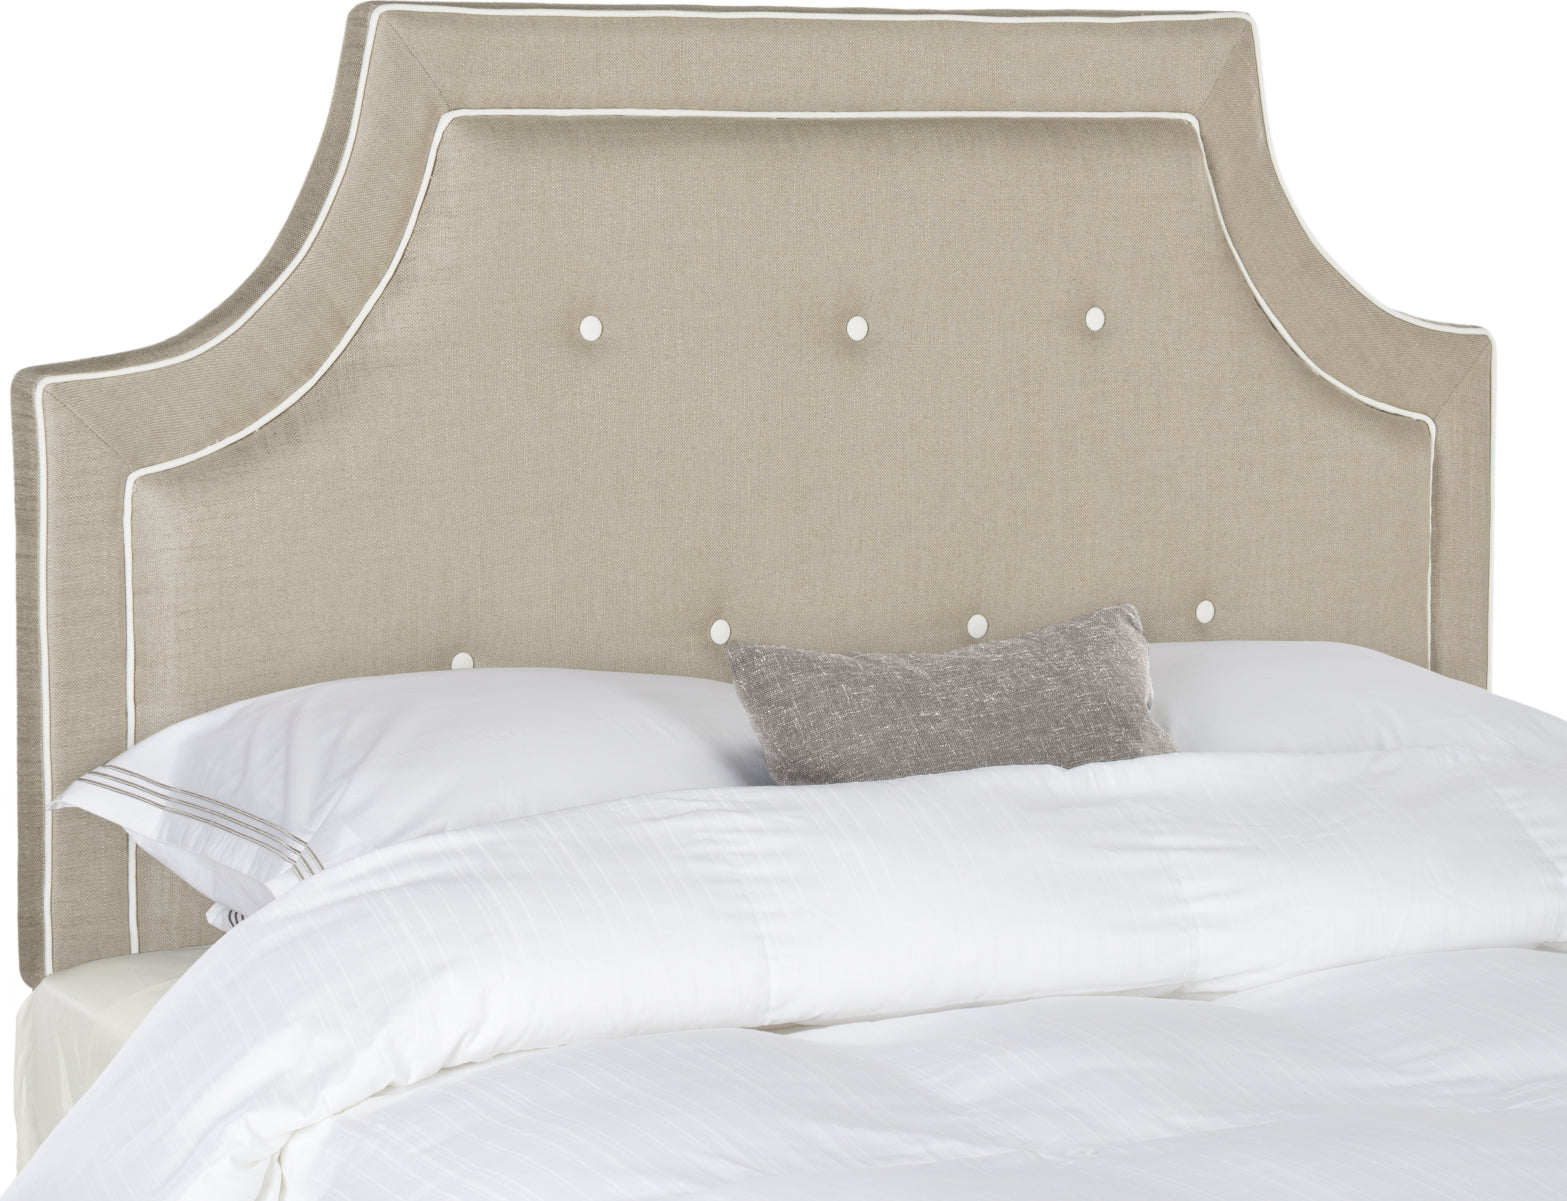 Safavieh Tallulah Light Oyster Arched Tufted Headboard Bedding main image